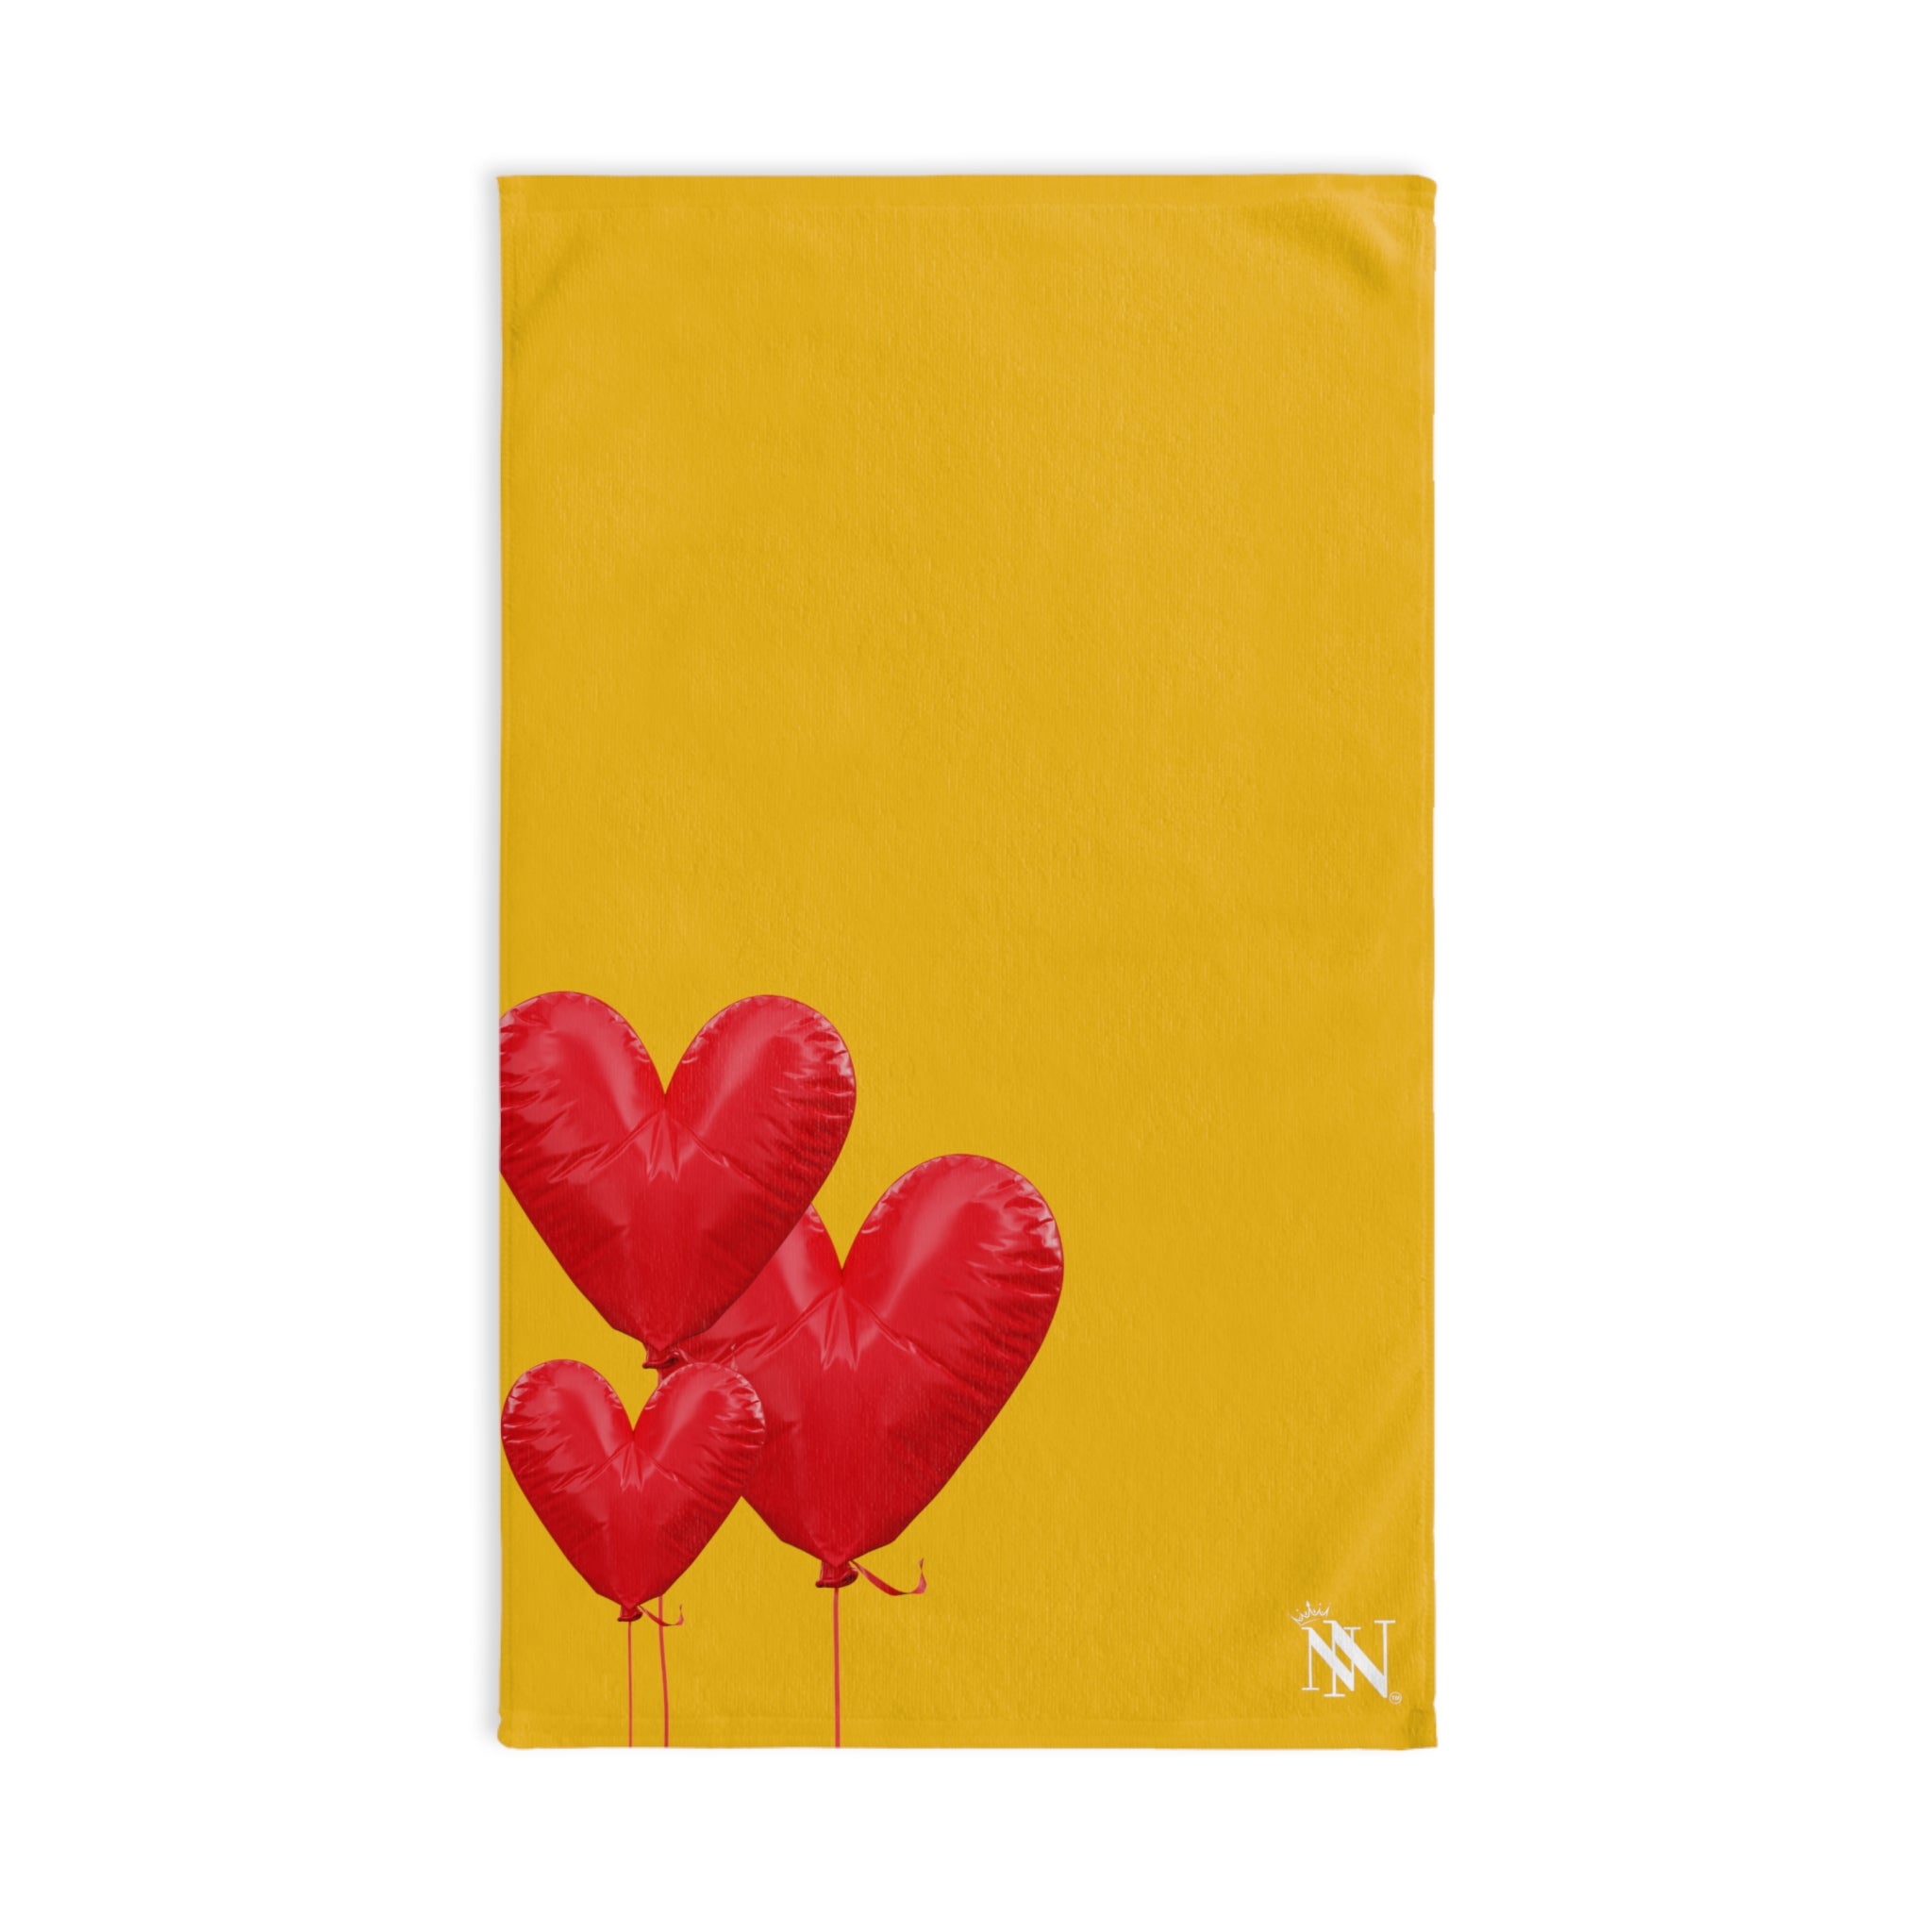 Bouquet Red Heart Yellow | Funny Gifts for Men - Gifts for Him - Birthday Gifts for Men, Him, Husband, Boyfriend, New Couple Gifts, Fathers & Valentines Day Gifts, Christmas Gifts NECTAR NAPKINS